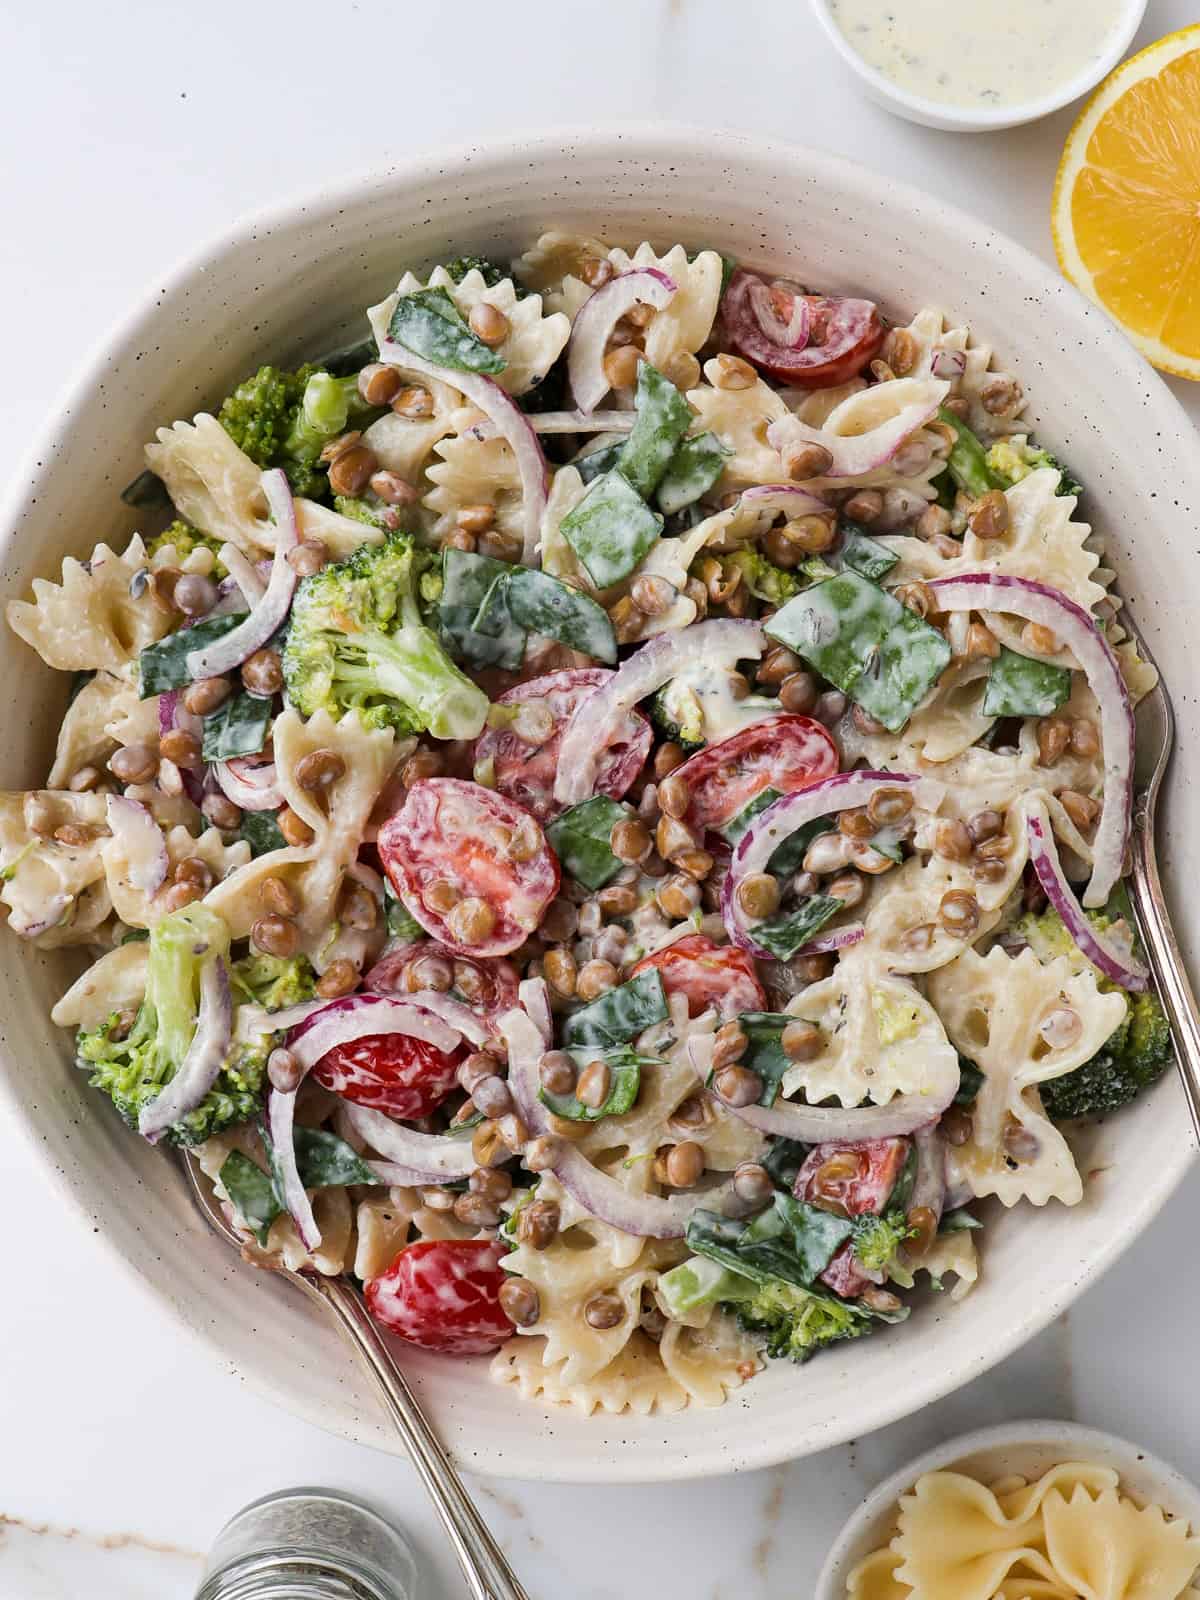 Pasta salad in a bowl with forks.